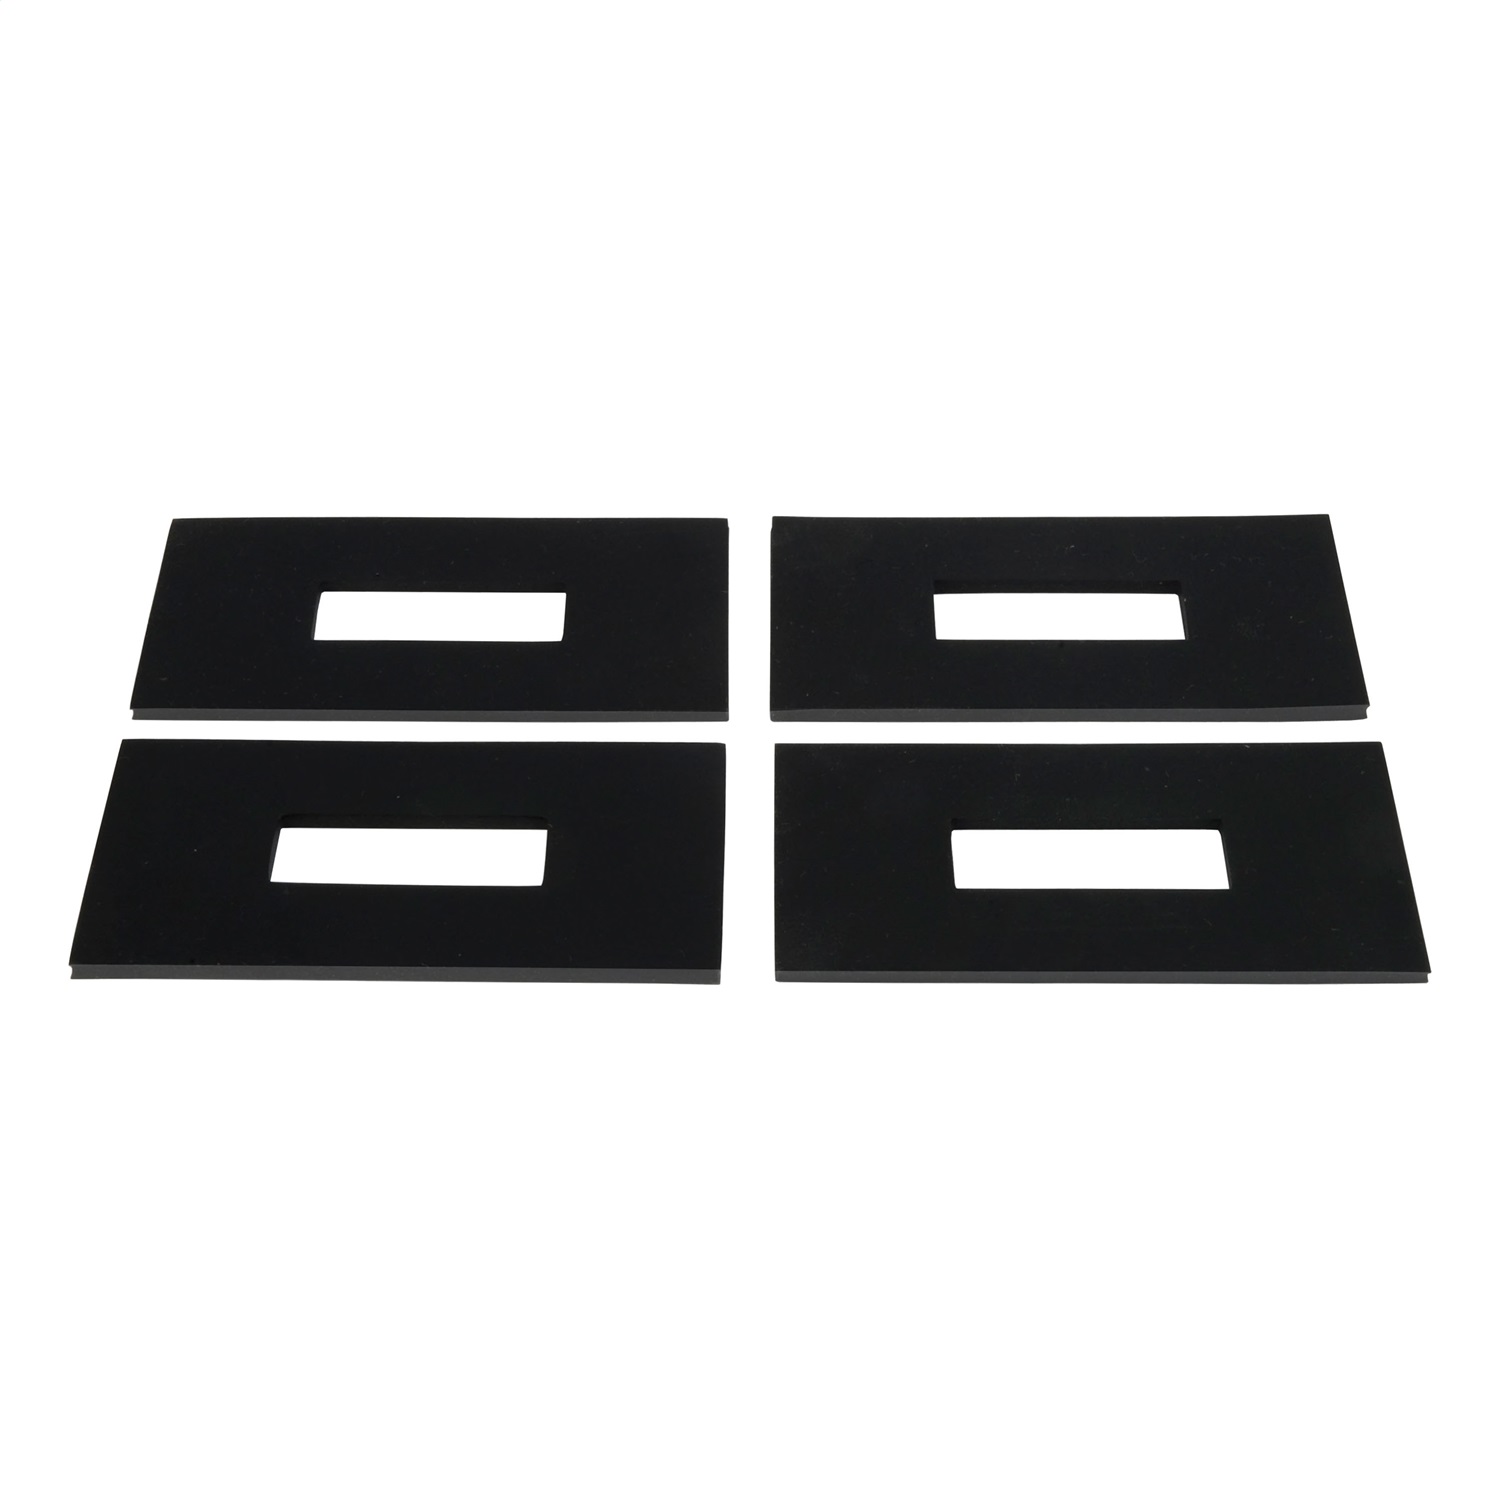 CURT Manufacturing CURT Manufacturing 16901 Fifth Wheel Foot Shims  Fits